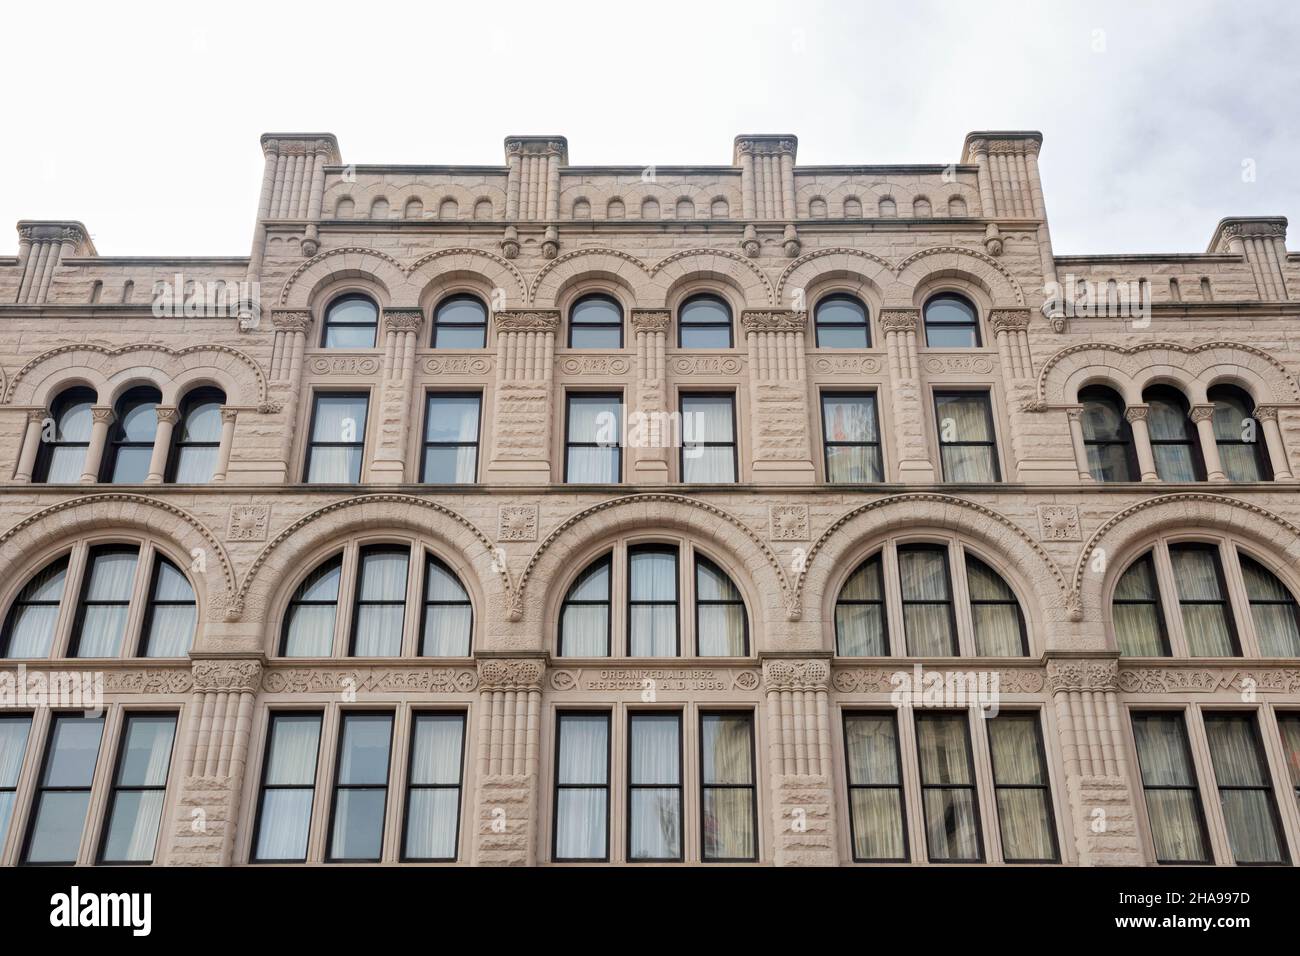 facade of historic landmark formerly loyalty building in milwaukee wisconsin of richardsonian romanesque style architecture Stock Photo